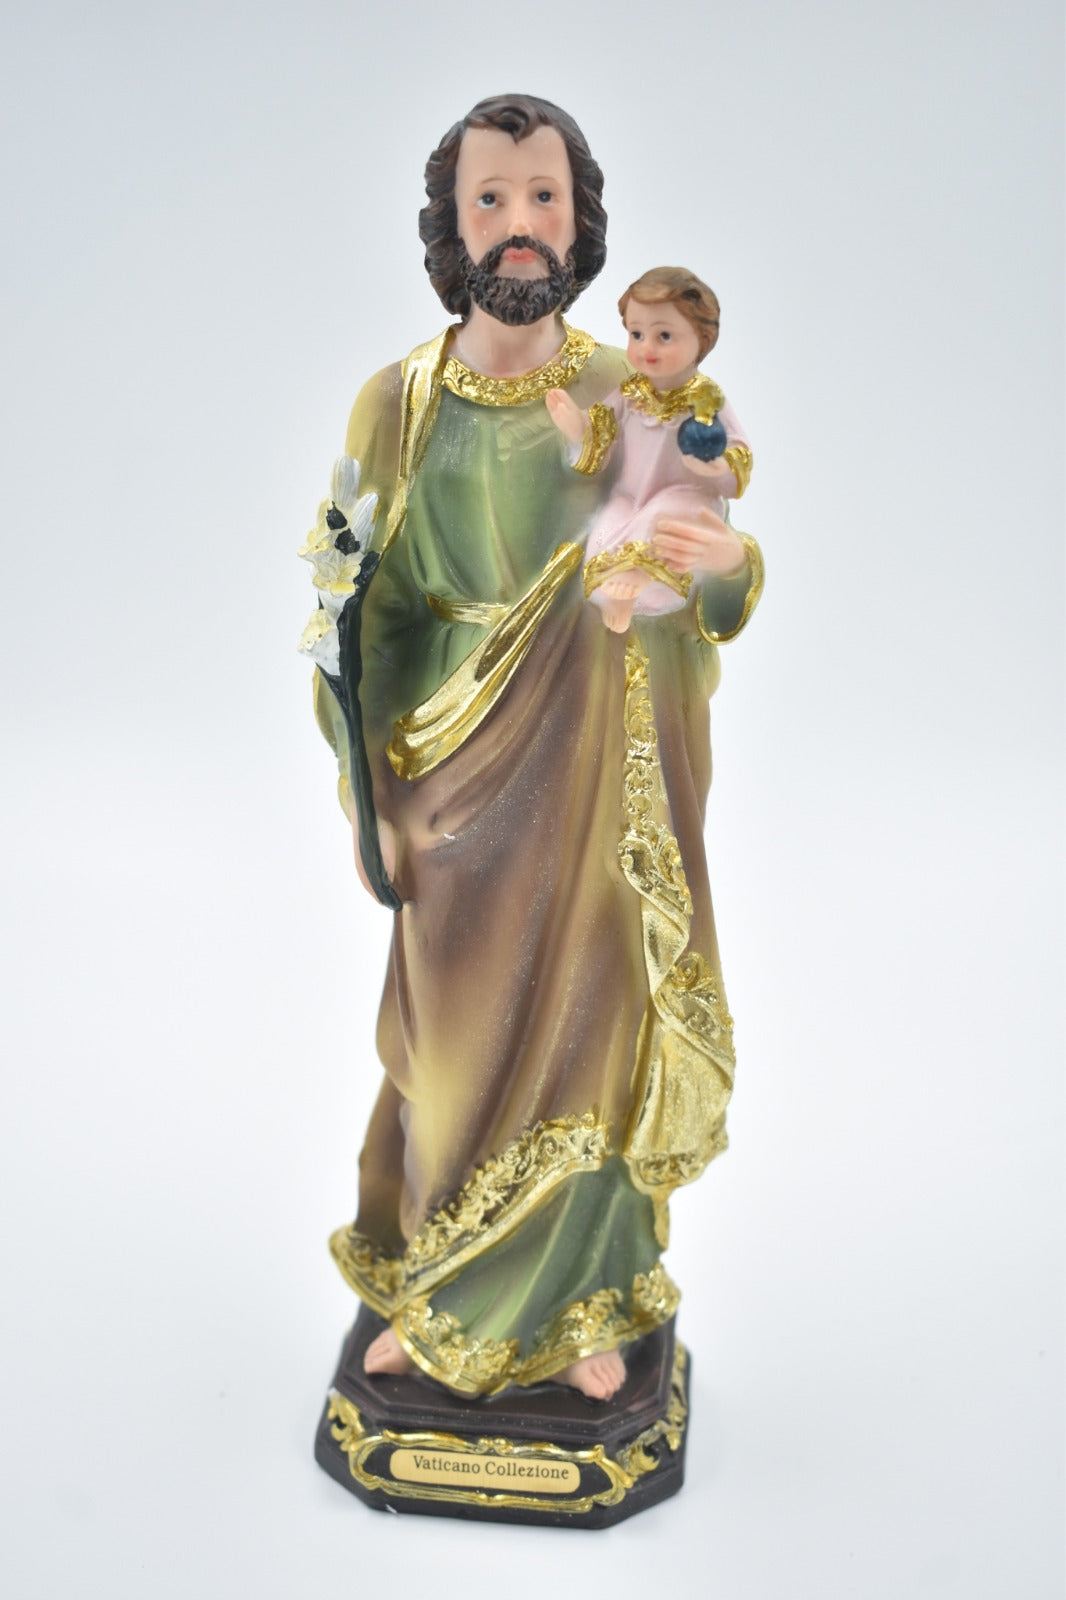 St. Joseph 9 Inch Statue - A Symbol of Humility and Devotion